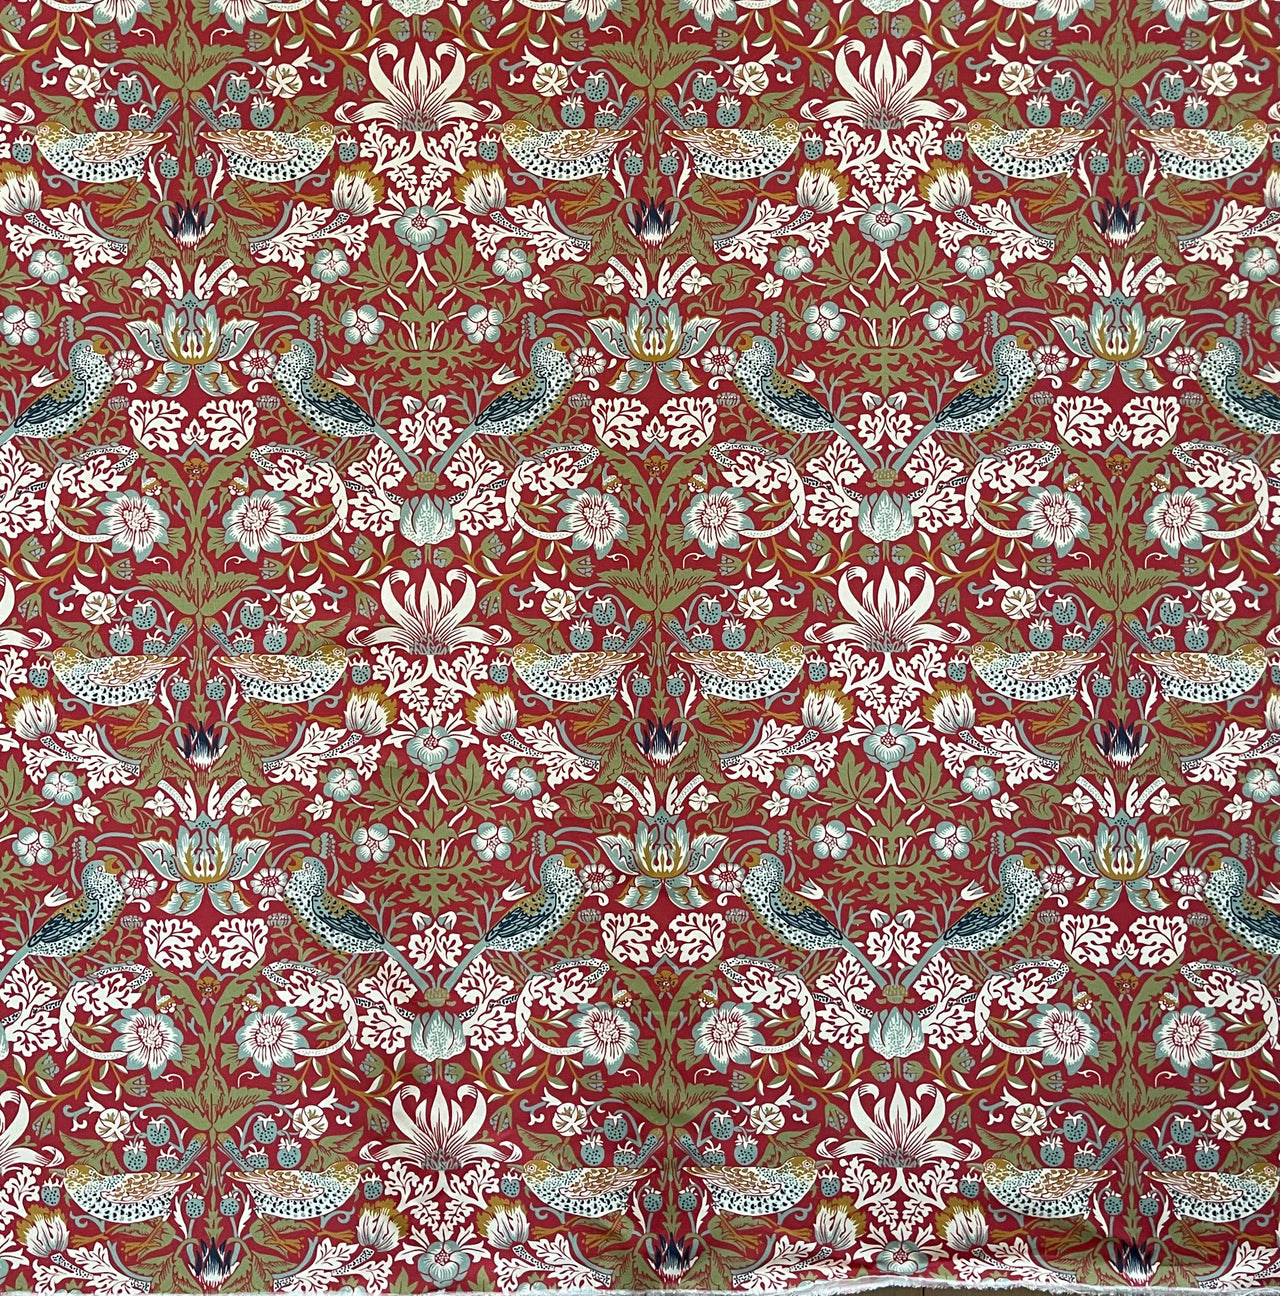 Custom William Morris Roman Blinds / Red and Green Cotton with Strawberry Thief Pattern - Made to Measure for Home Decor